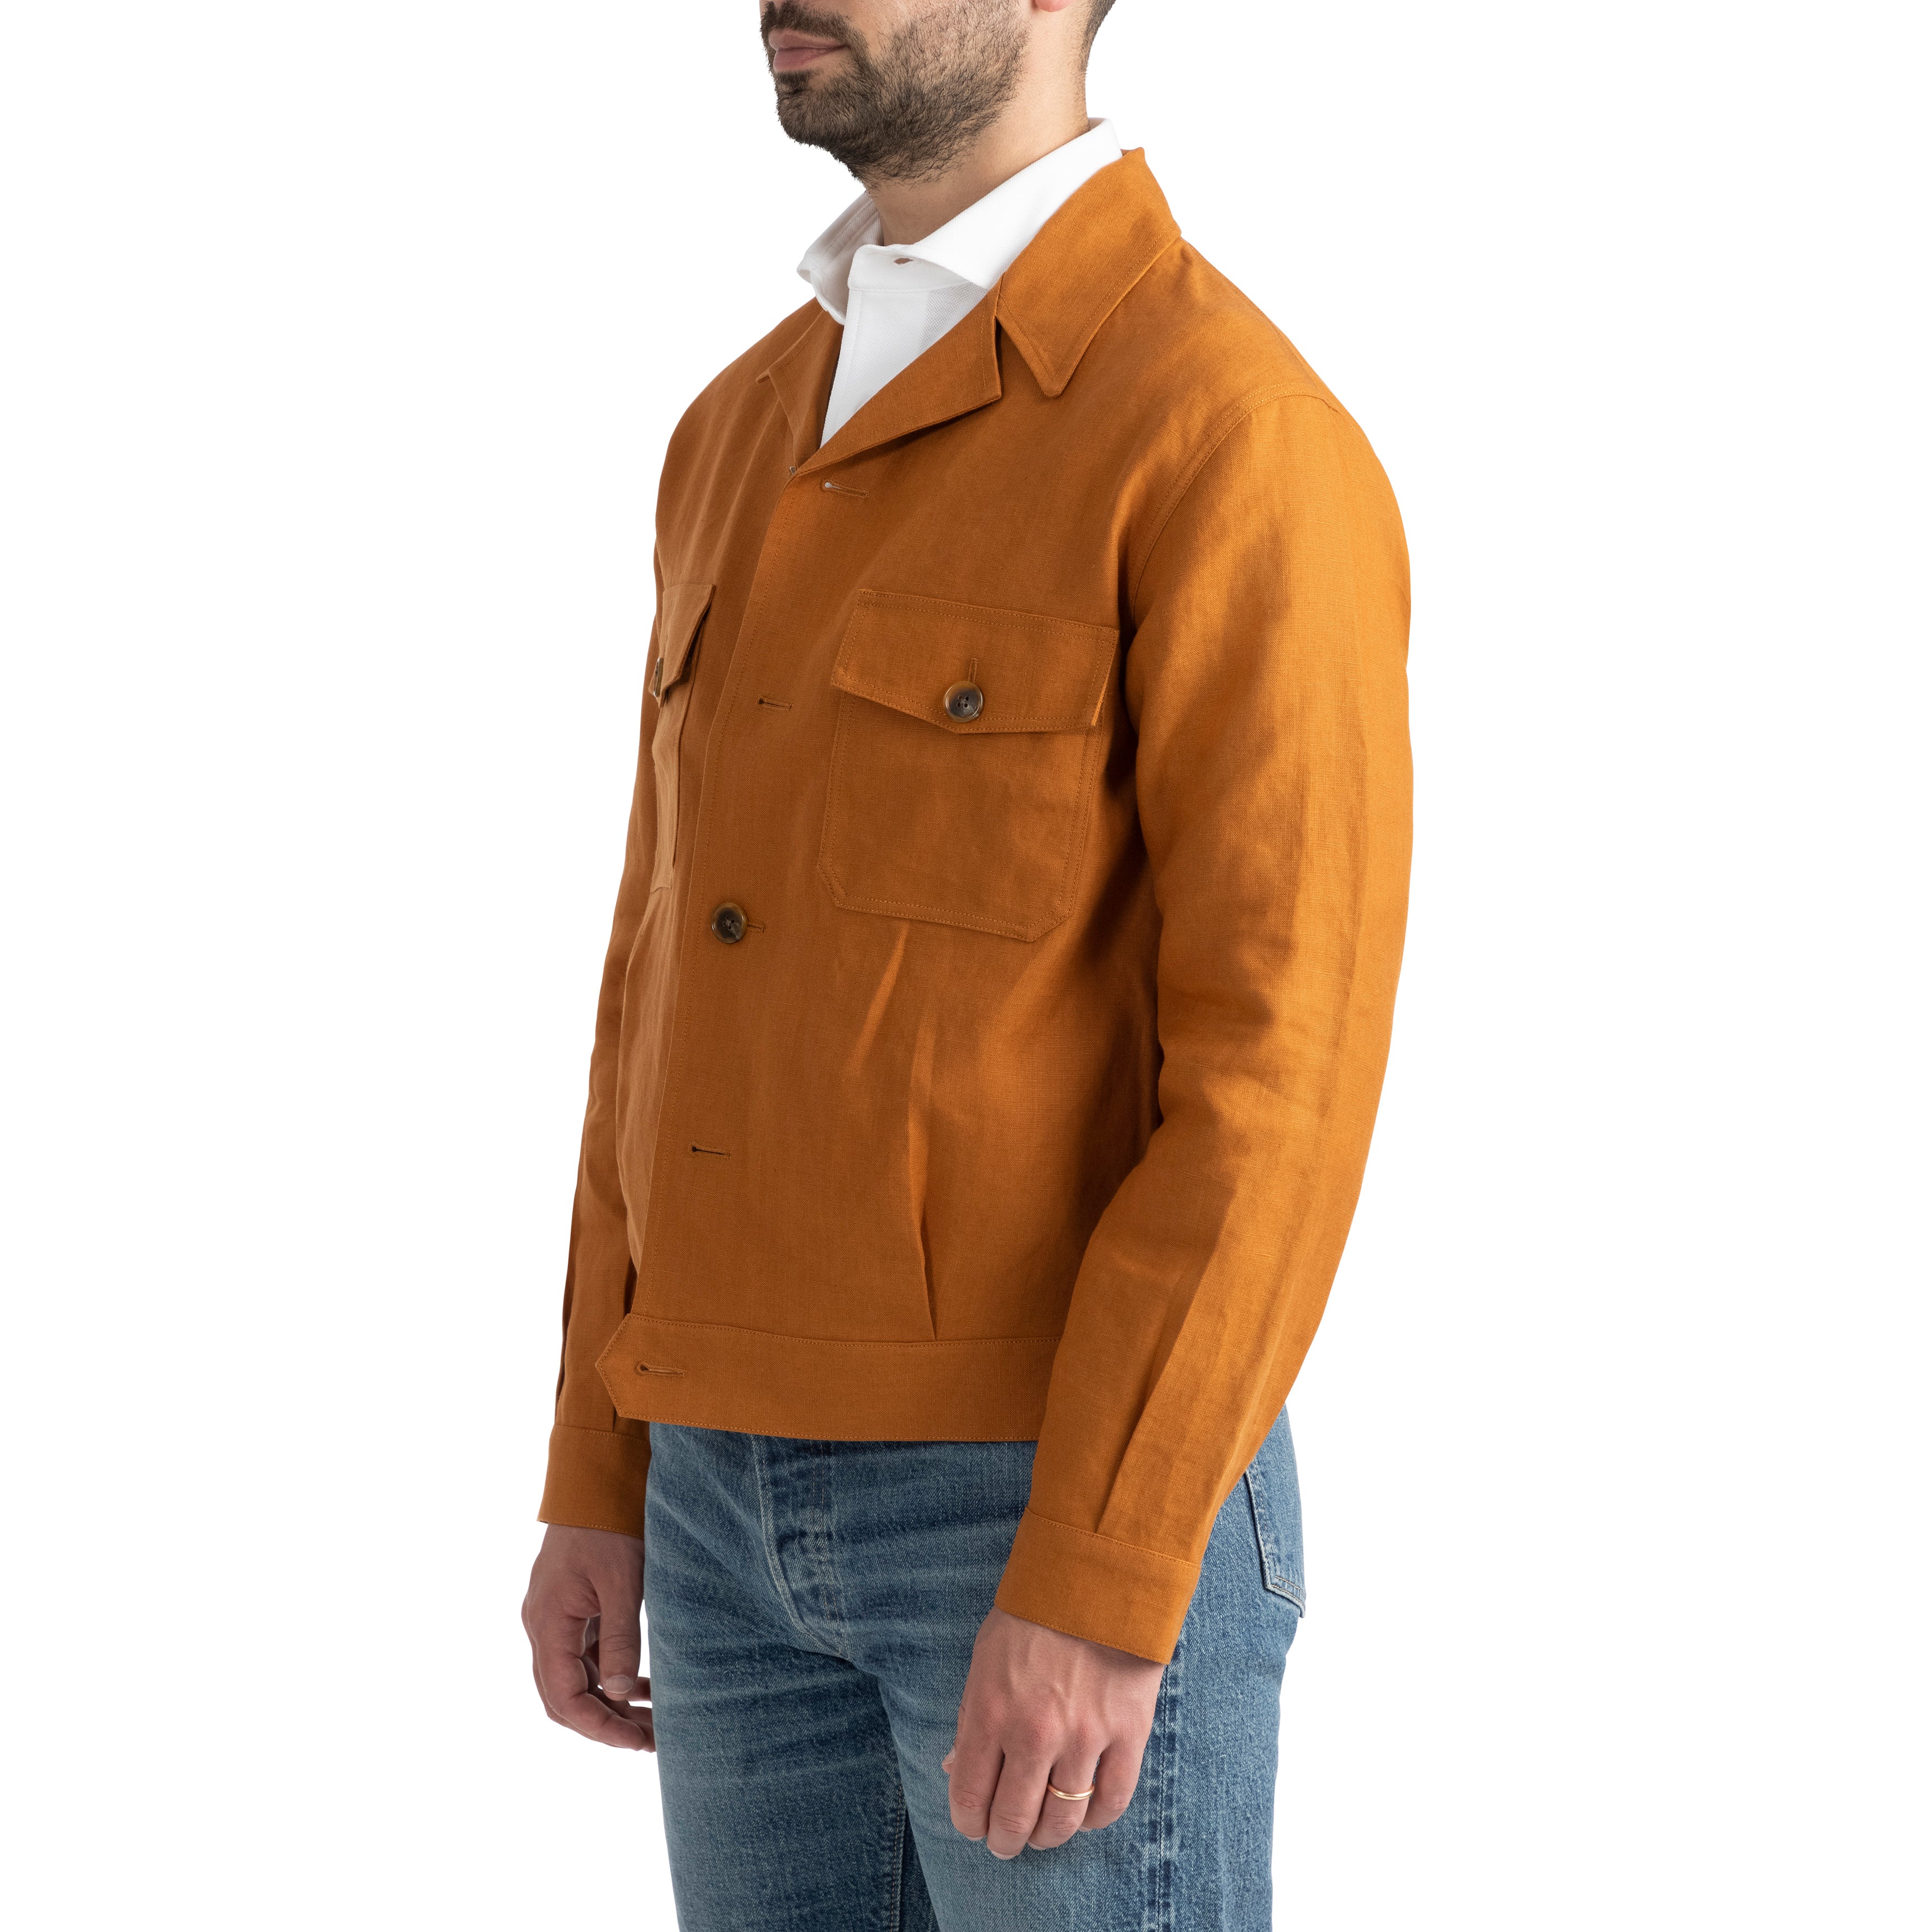 Linen Road Jacket - The Armoury